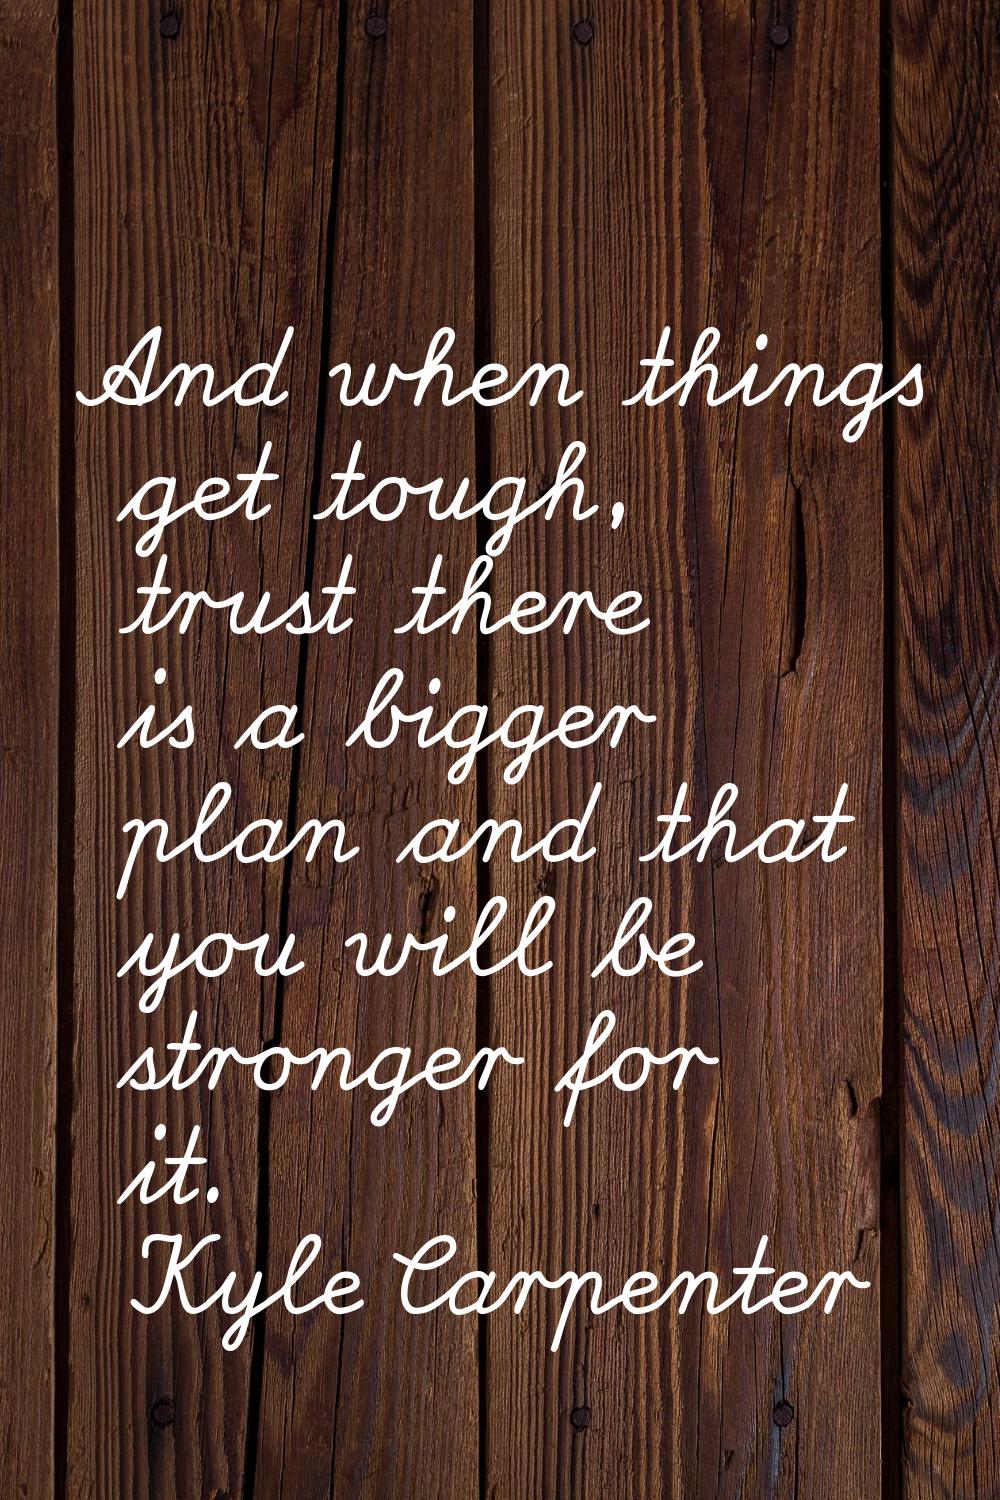 And when things get tough, trust there is a bigger plan and that you will be stronger for it.